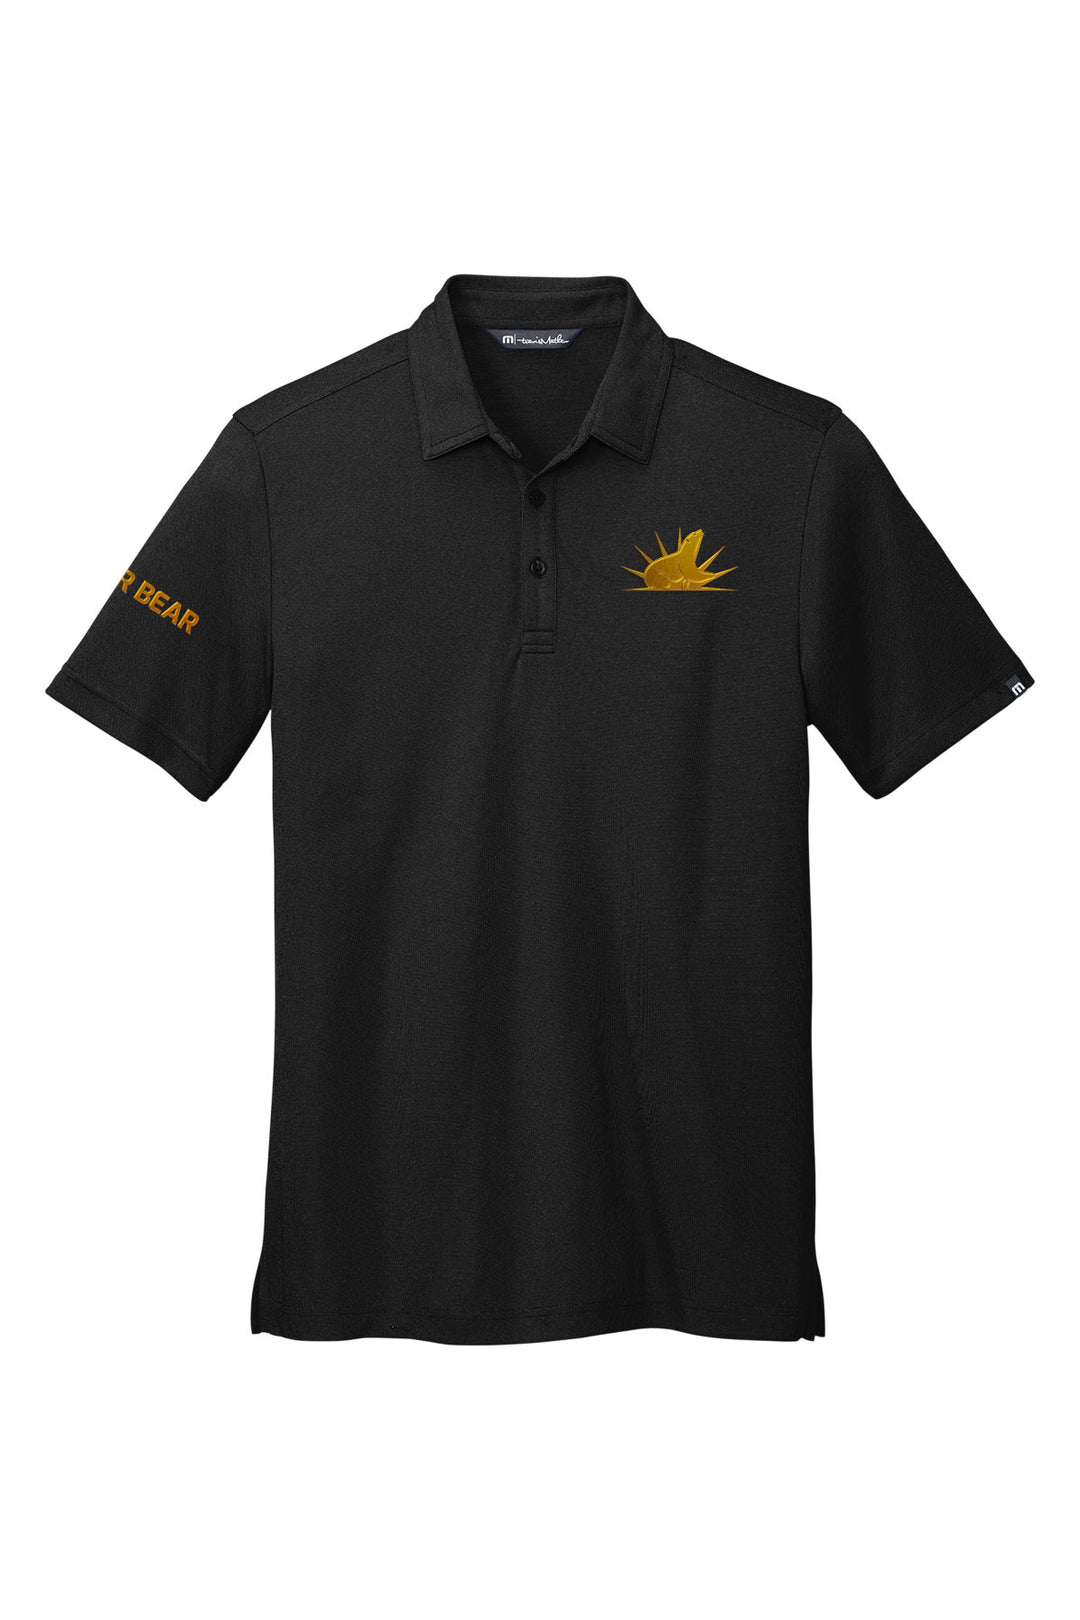 Exclusive KW King Polo